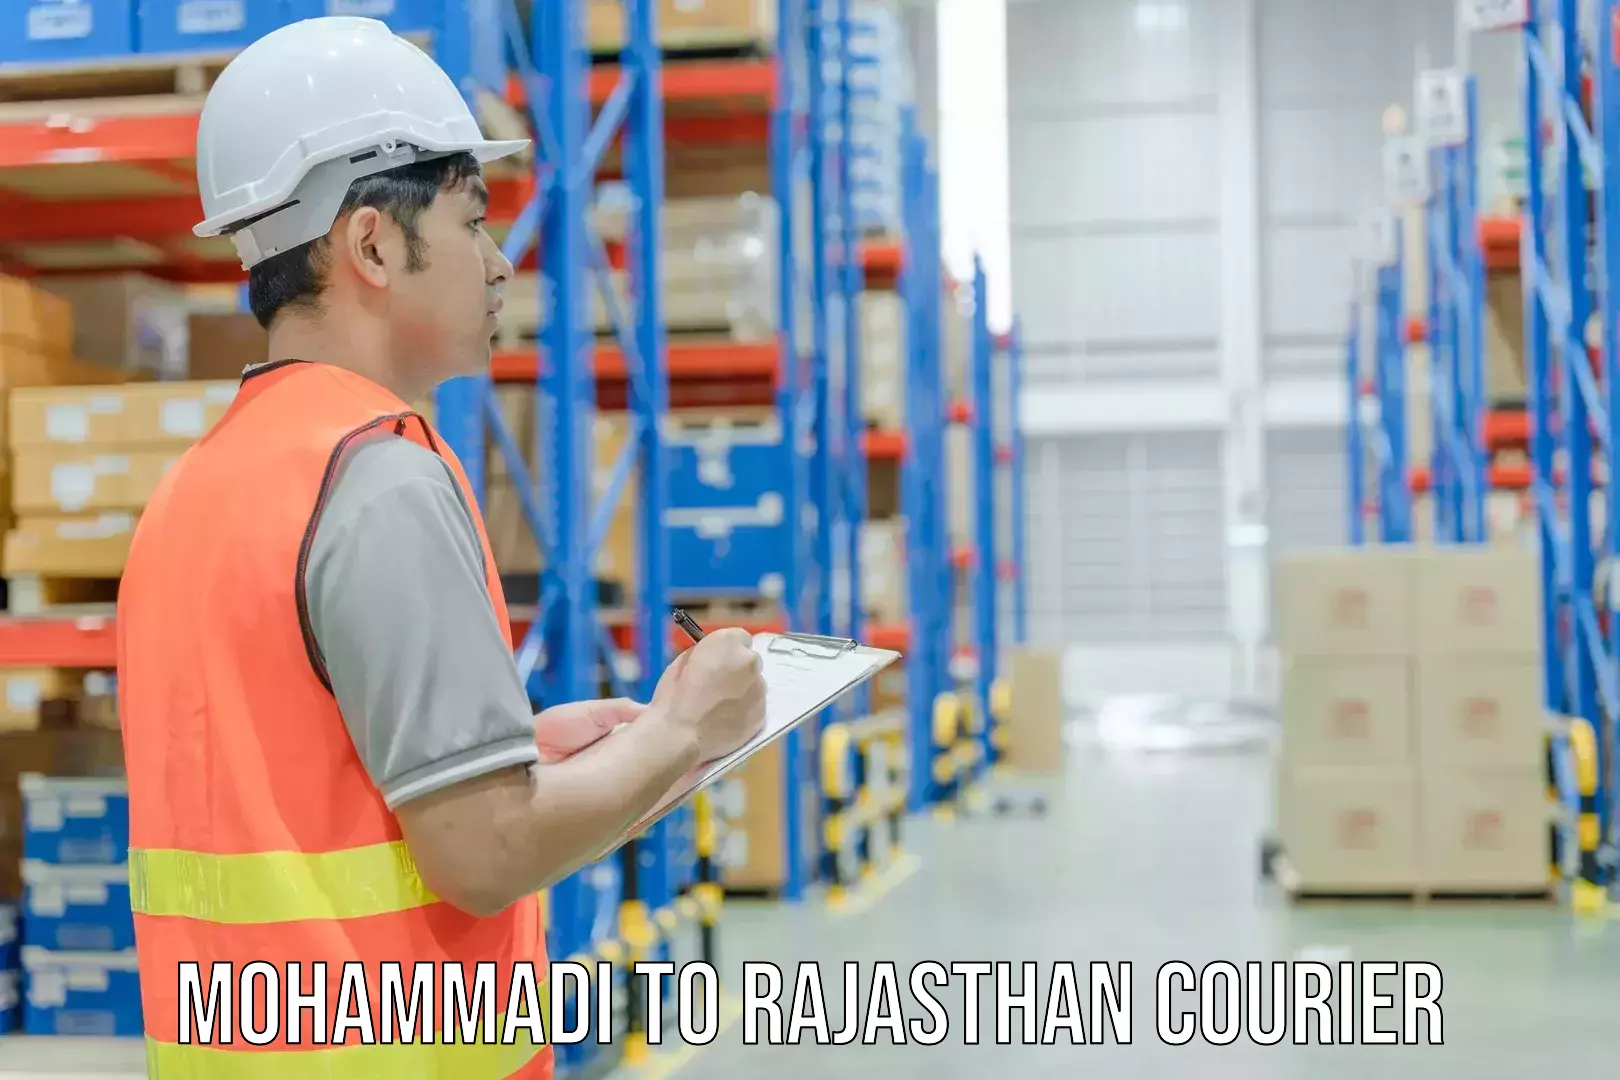 Reliable courier services in Mohammadi to Sultana